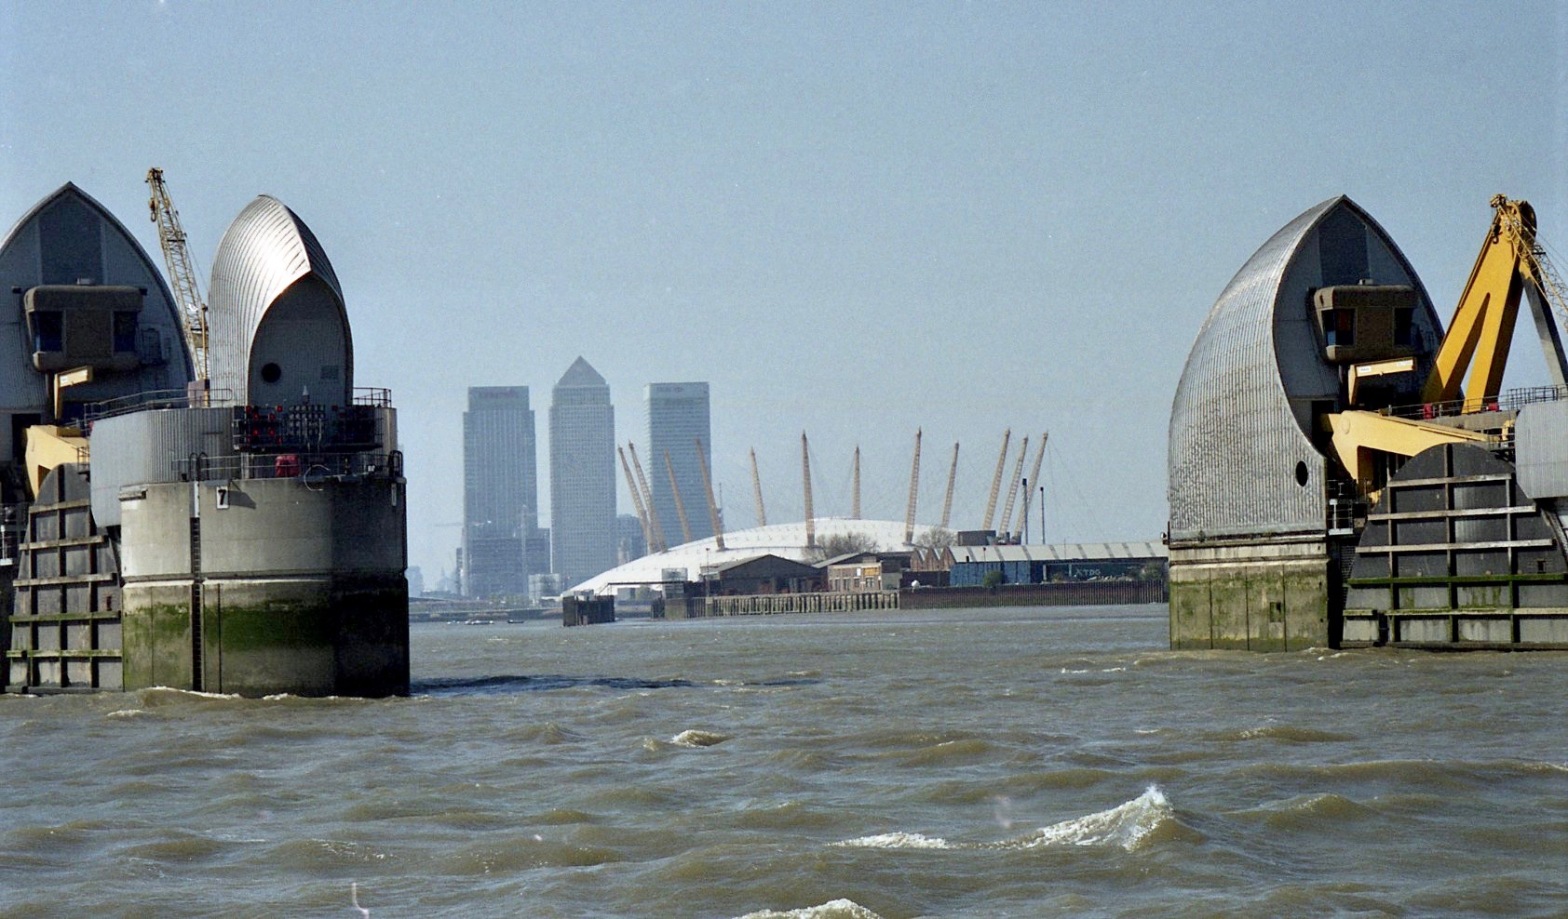 Thames Barrier, Millennium Dome, and Canary Wharf 6.4.02 1